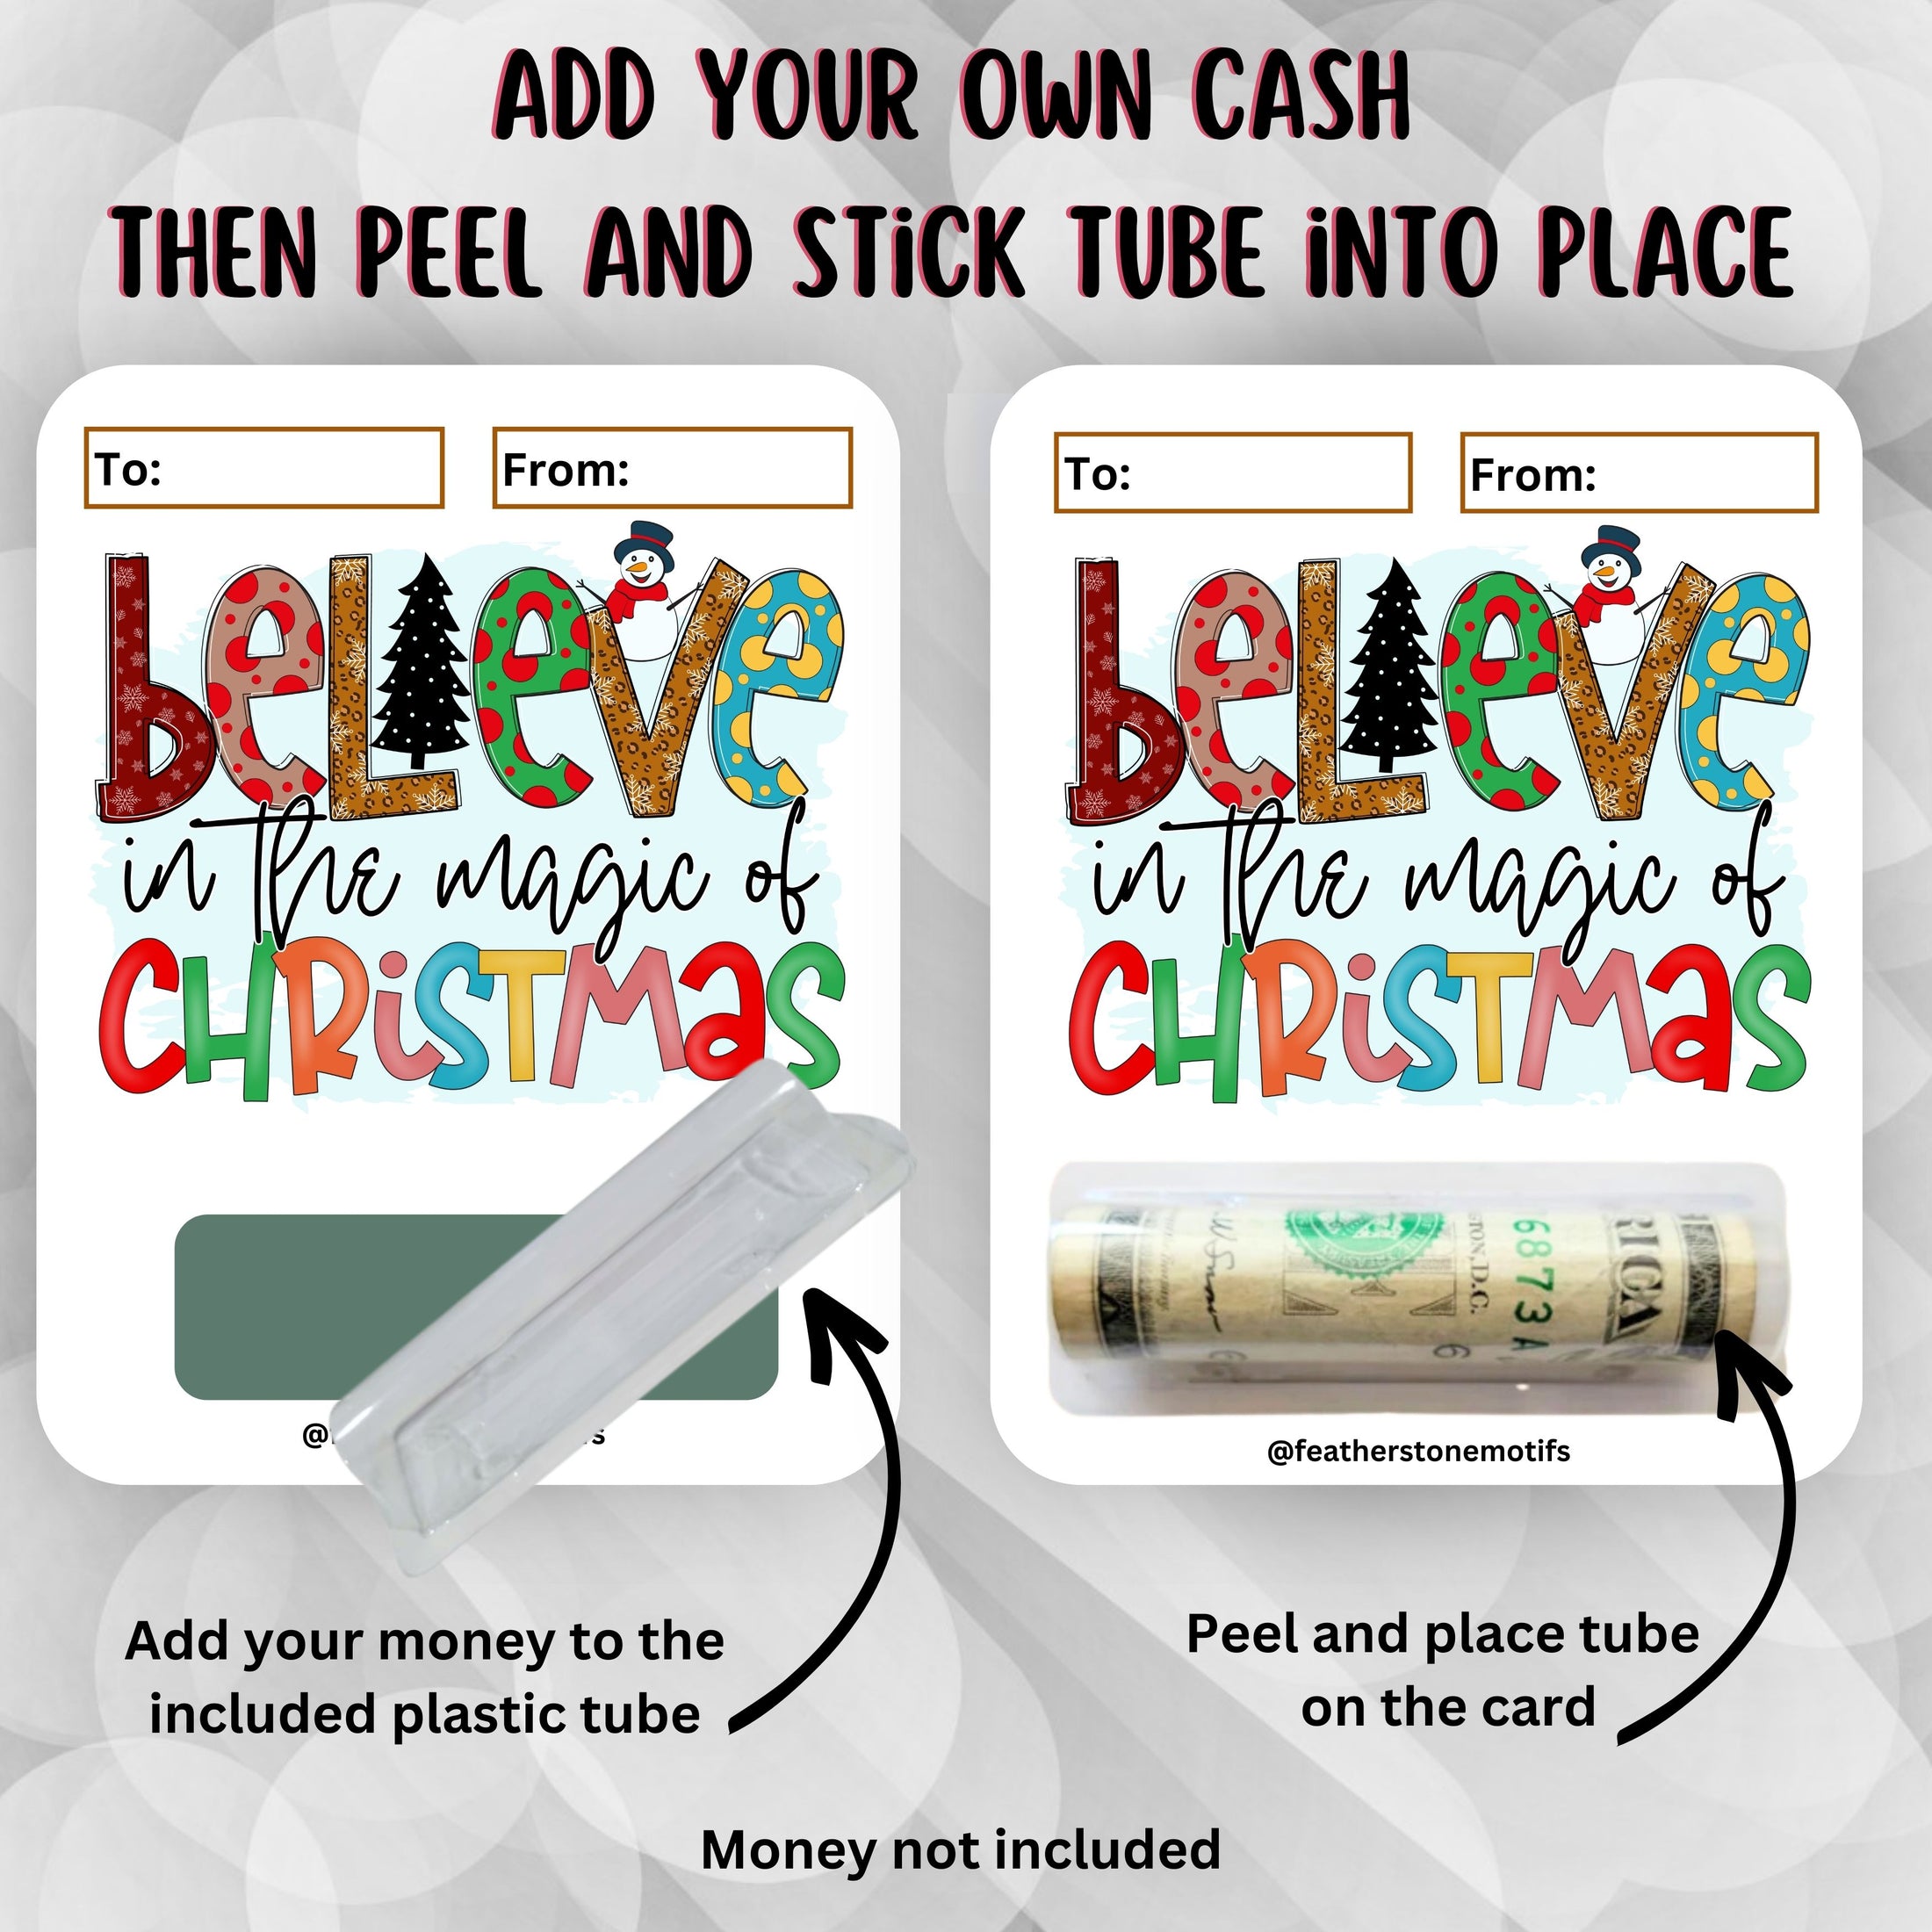 This image shows how to attach the money tube to the Christmas Magic Money Card.